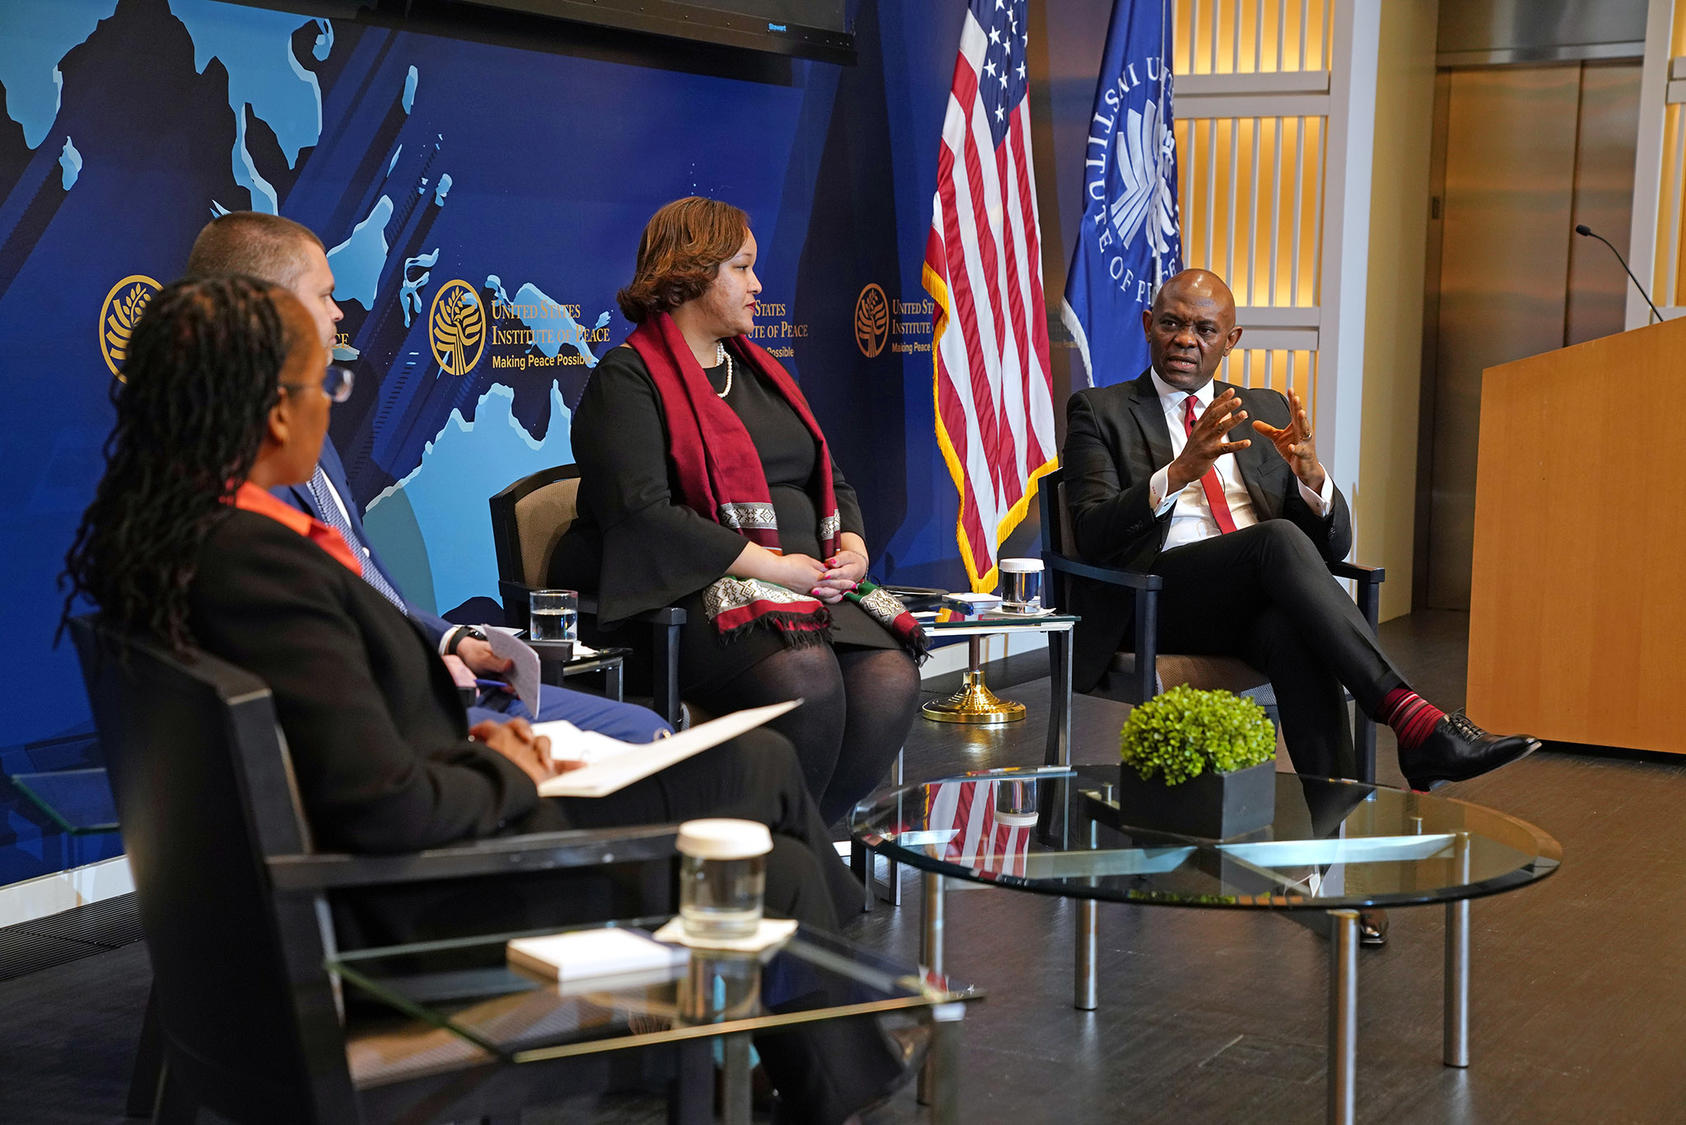 Makila James, a USIP senior advisor; Joshua Meservey, a senior policy analyst at the Heritage Foundation; Dana Banks, senior director for Africa at the U.S. National Security Council; and Tony Elumelu discuss entrepreneurship and peacebuilding in Africa.